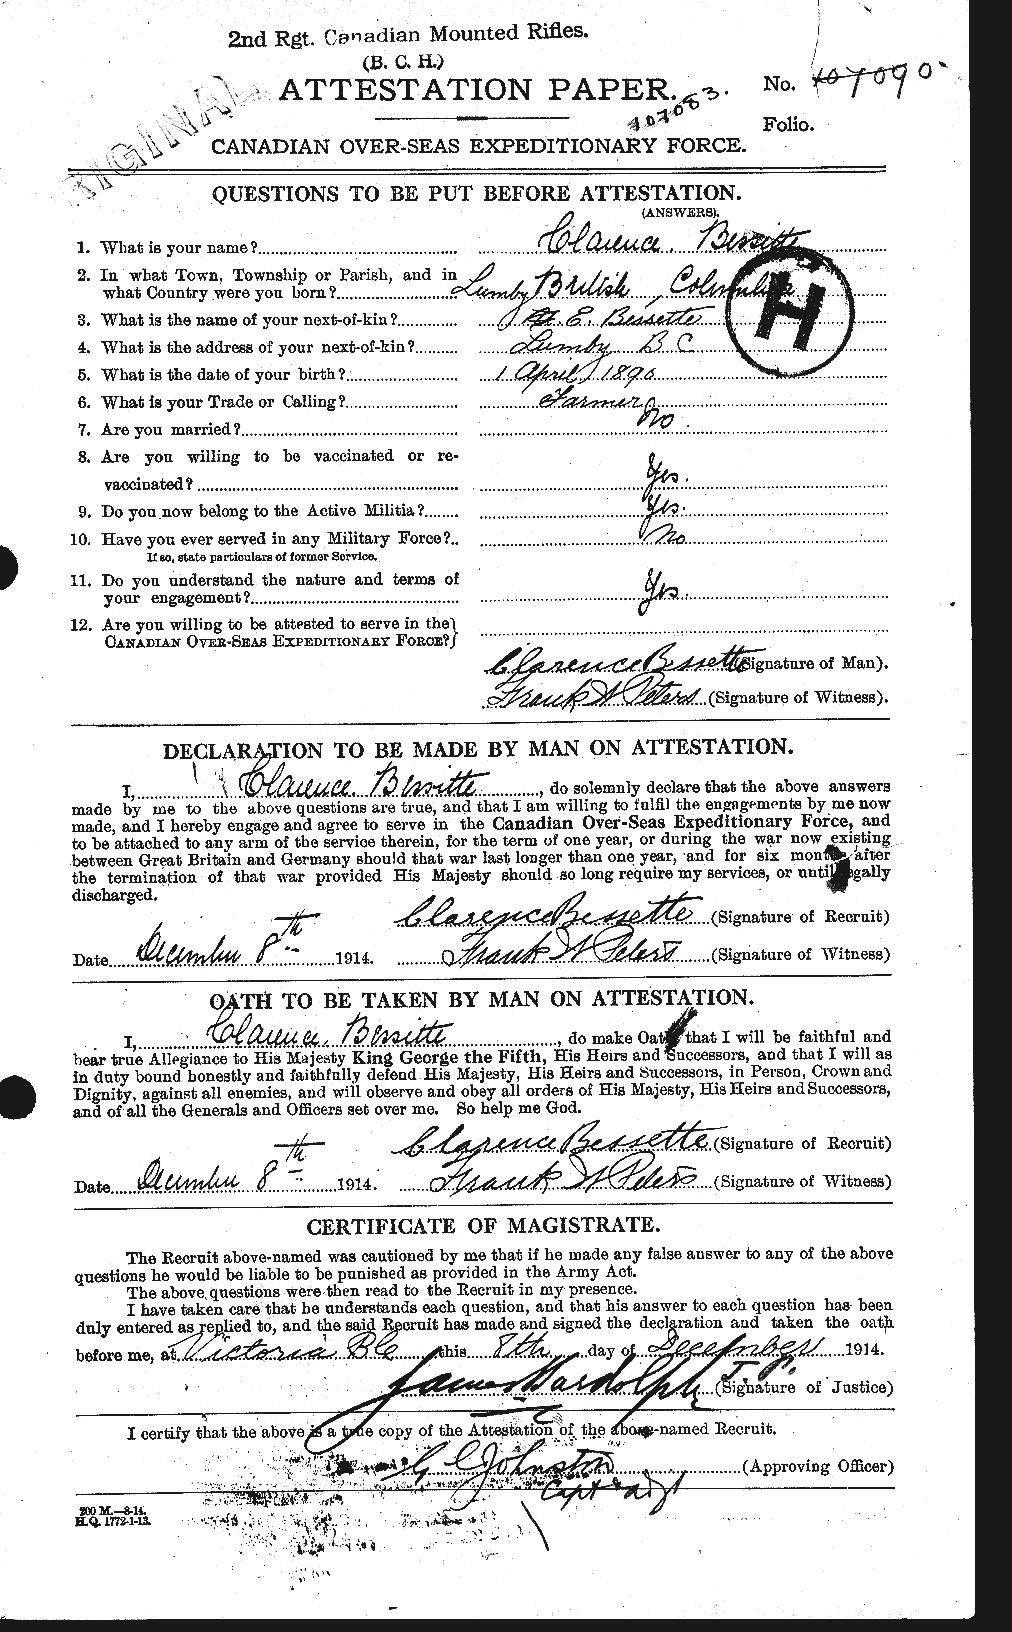 Personnel Records of the First World War - CEF 240166a